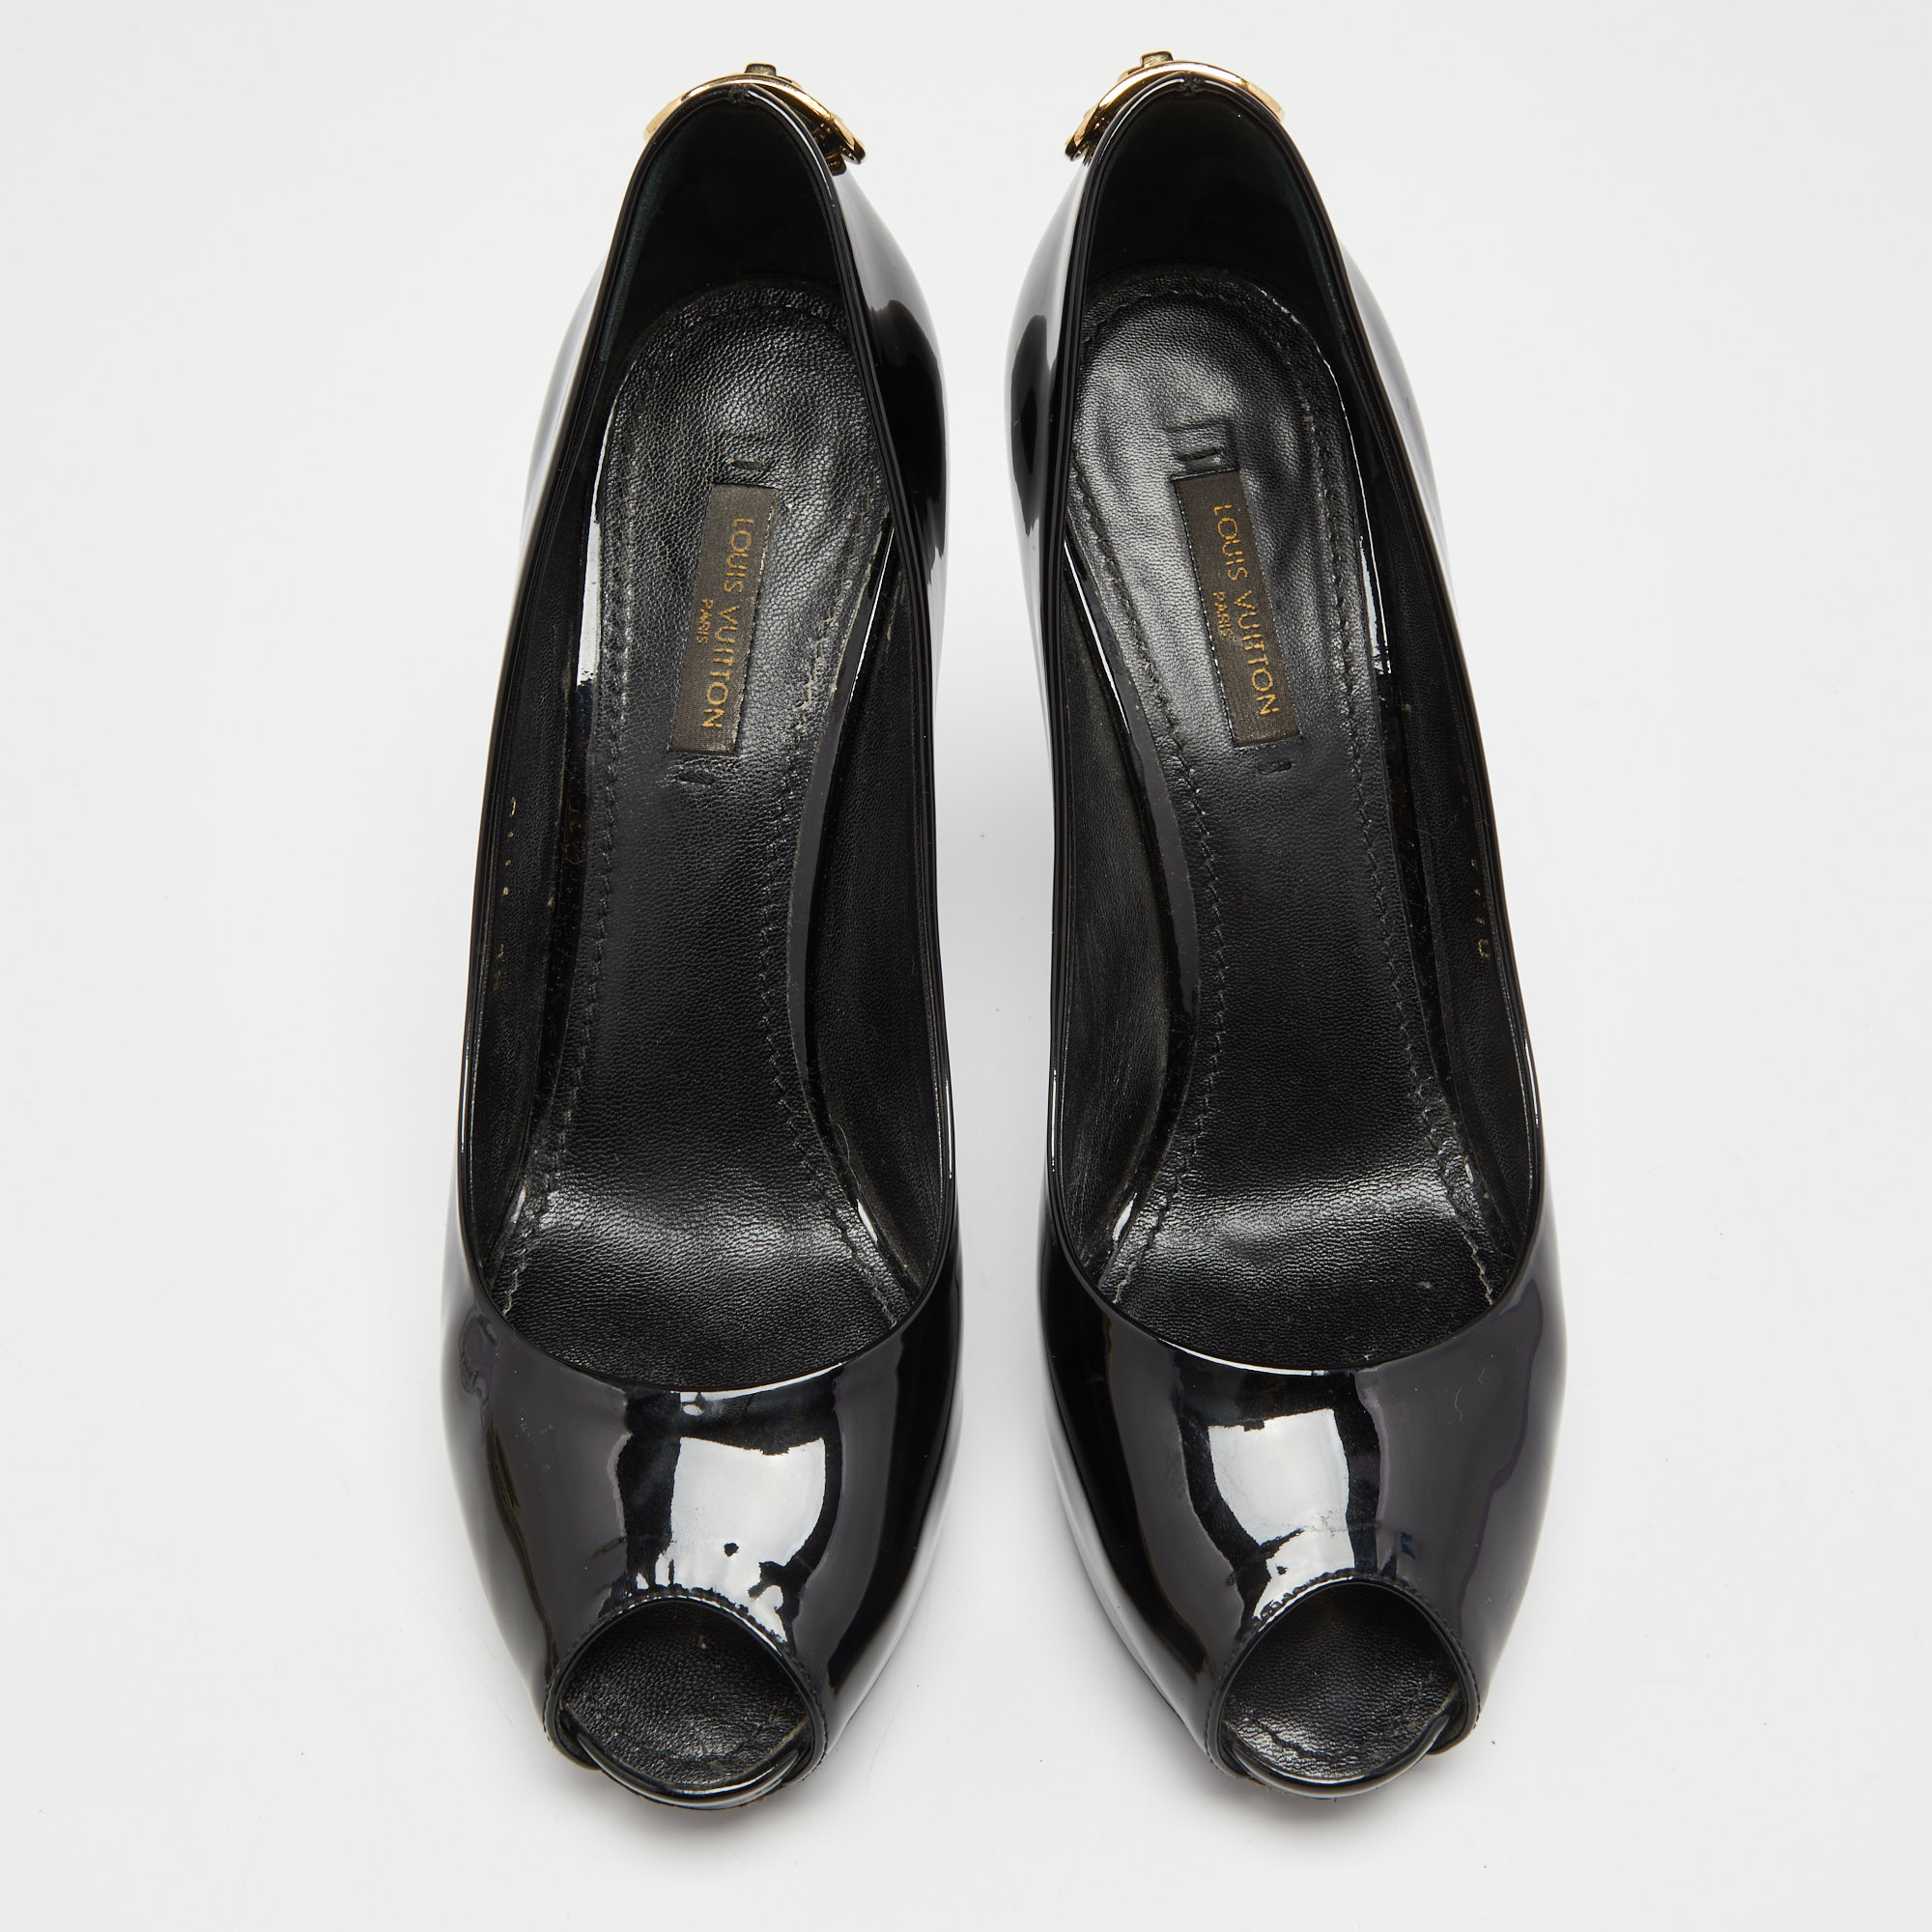 Louis Vuitton Black Patent Leather Oh Really! Peep Toe Pumps Size 36.5